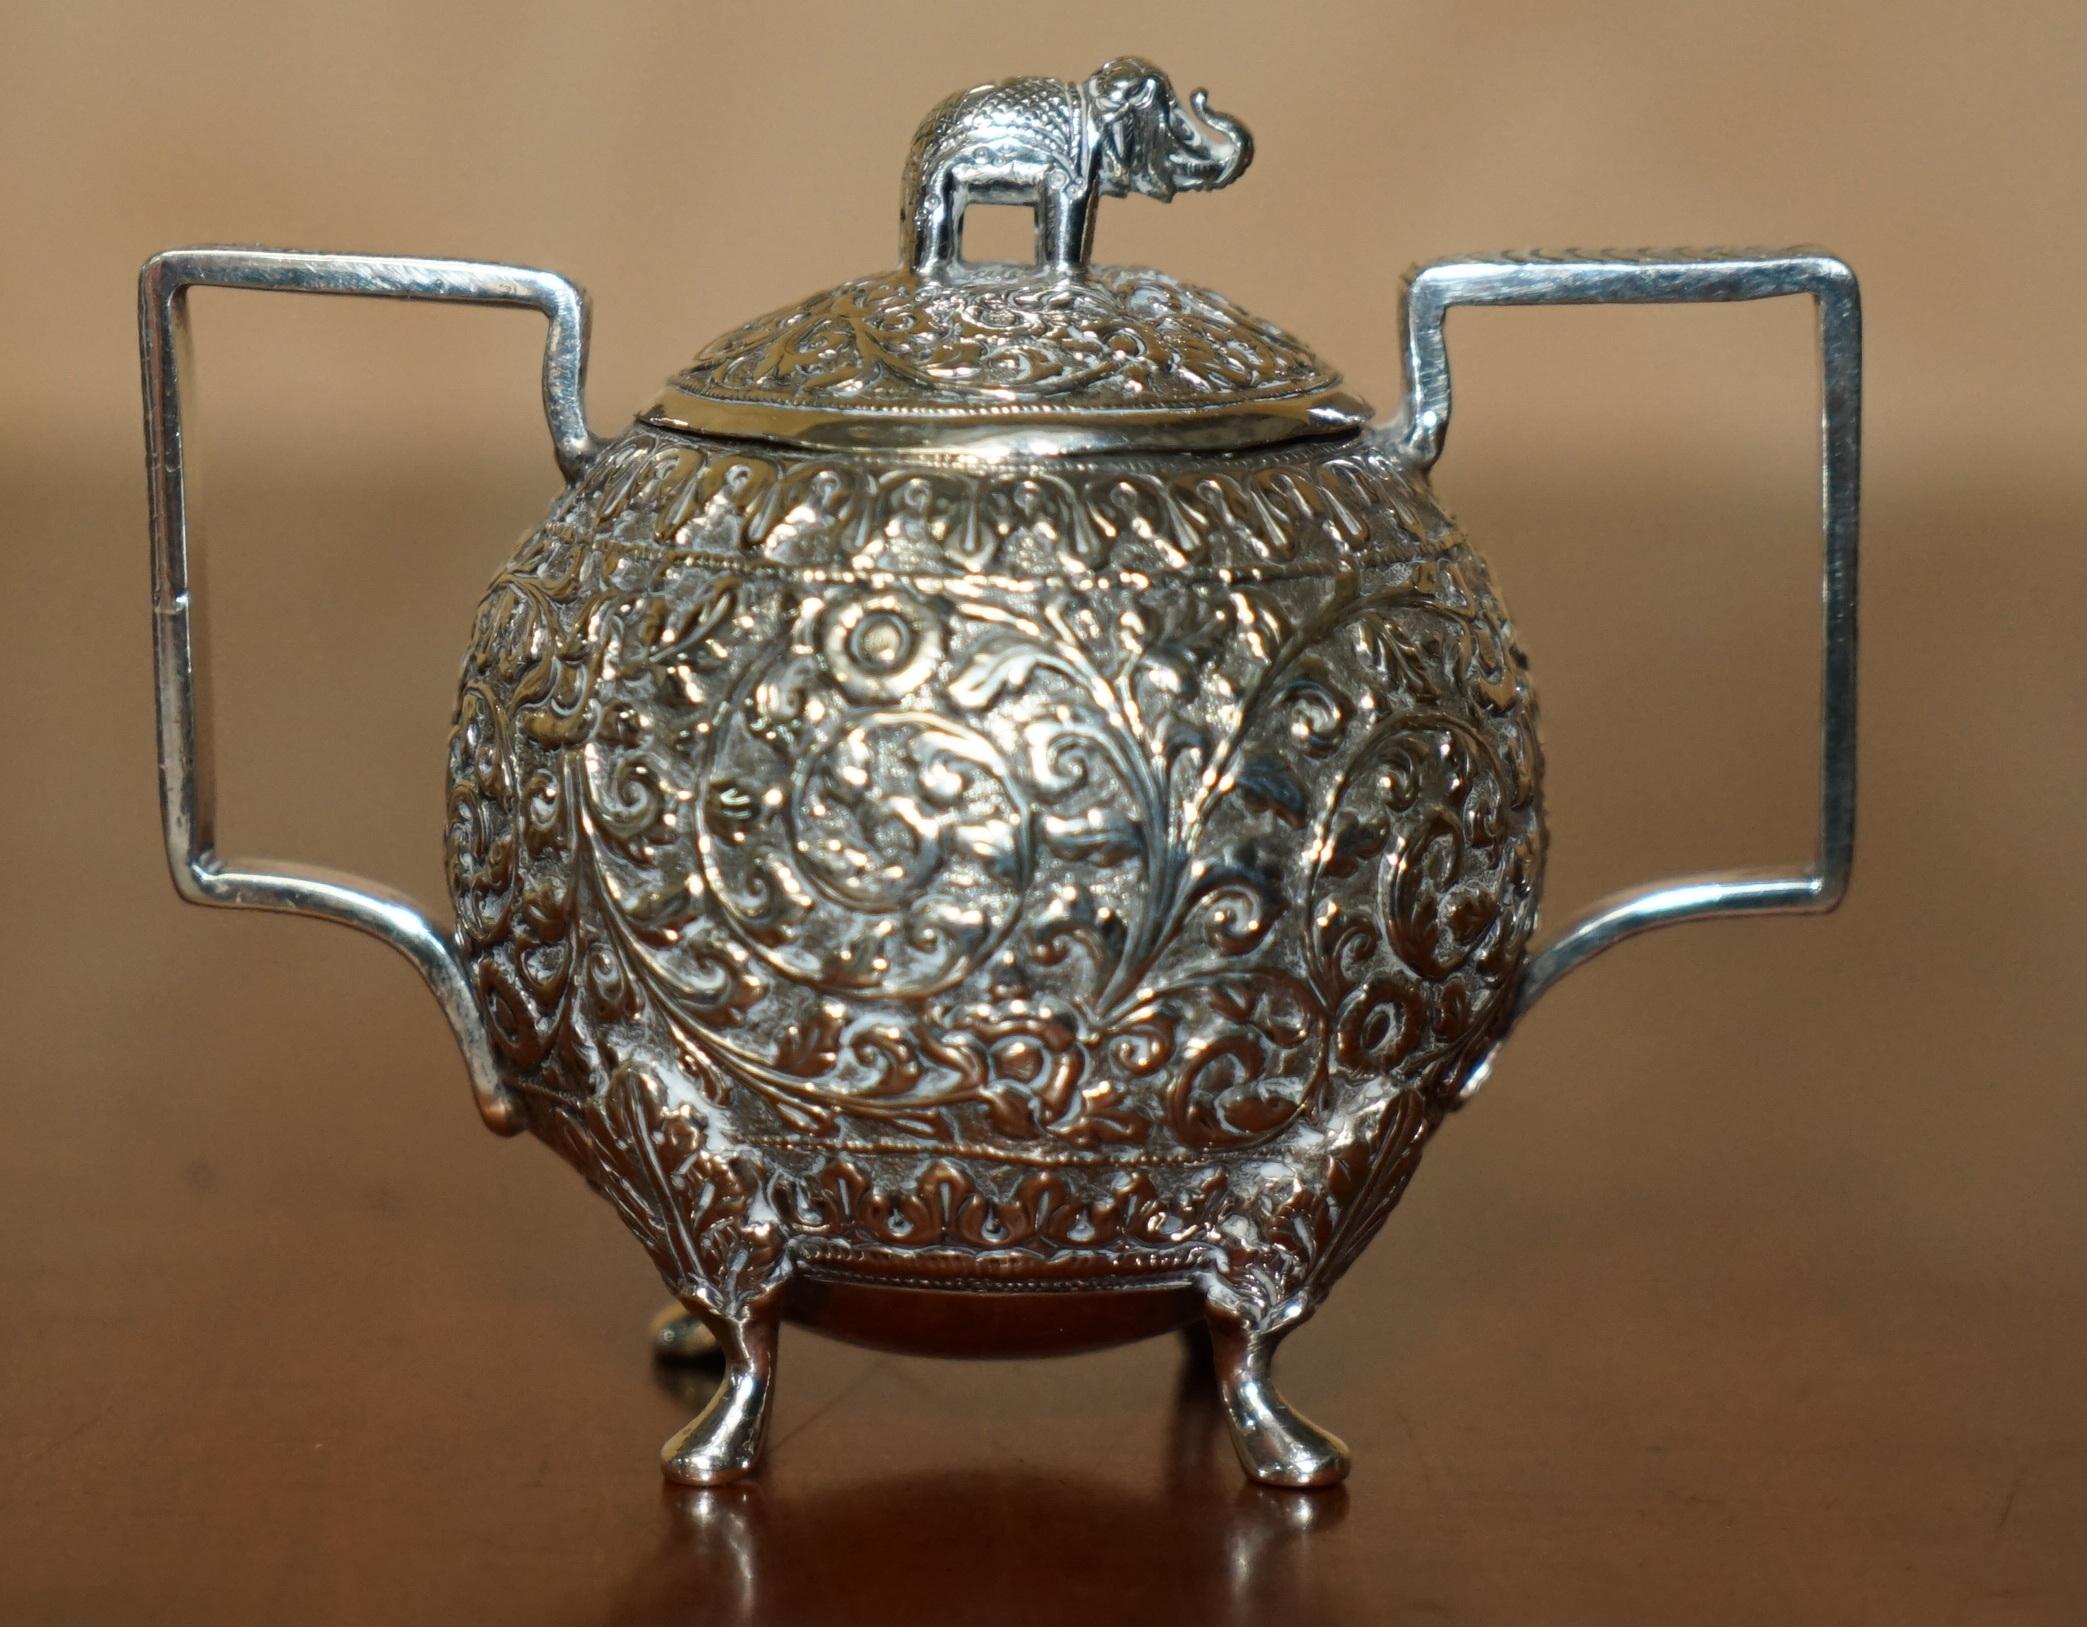 ANTIQUE INDIAN ELEPHANT COLONIAL SOLiD SILBER TEA SERVICE OOMERSI MAWJI & SONS im Angebot 8